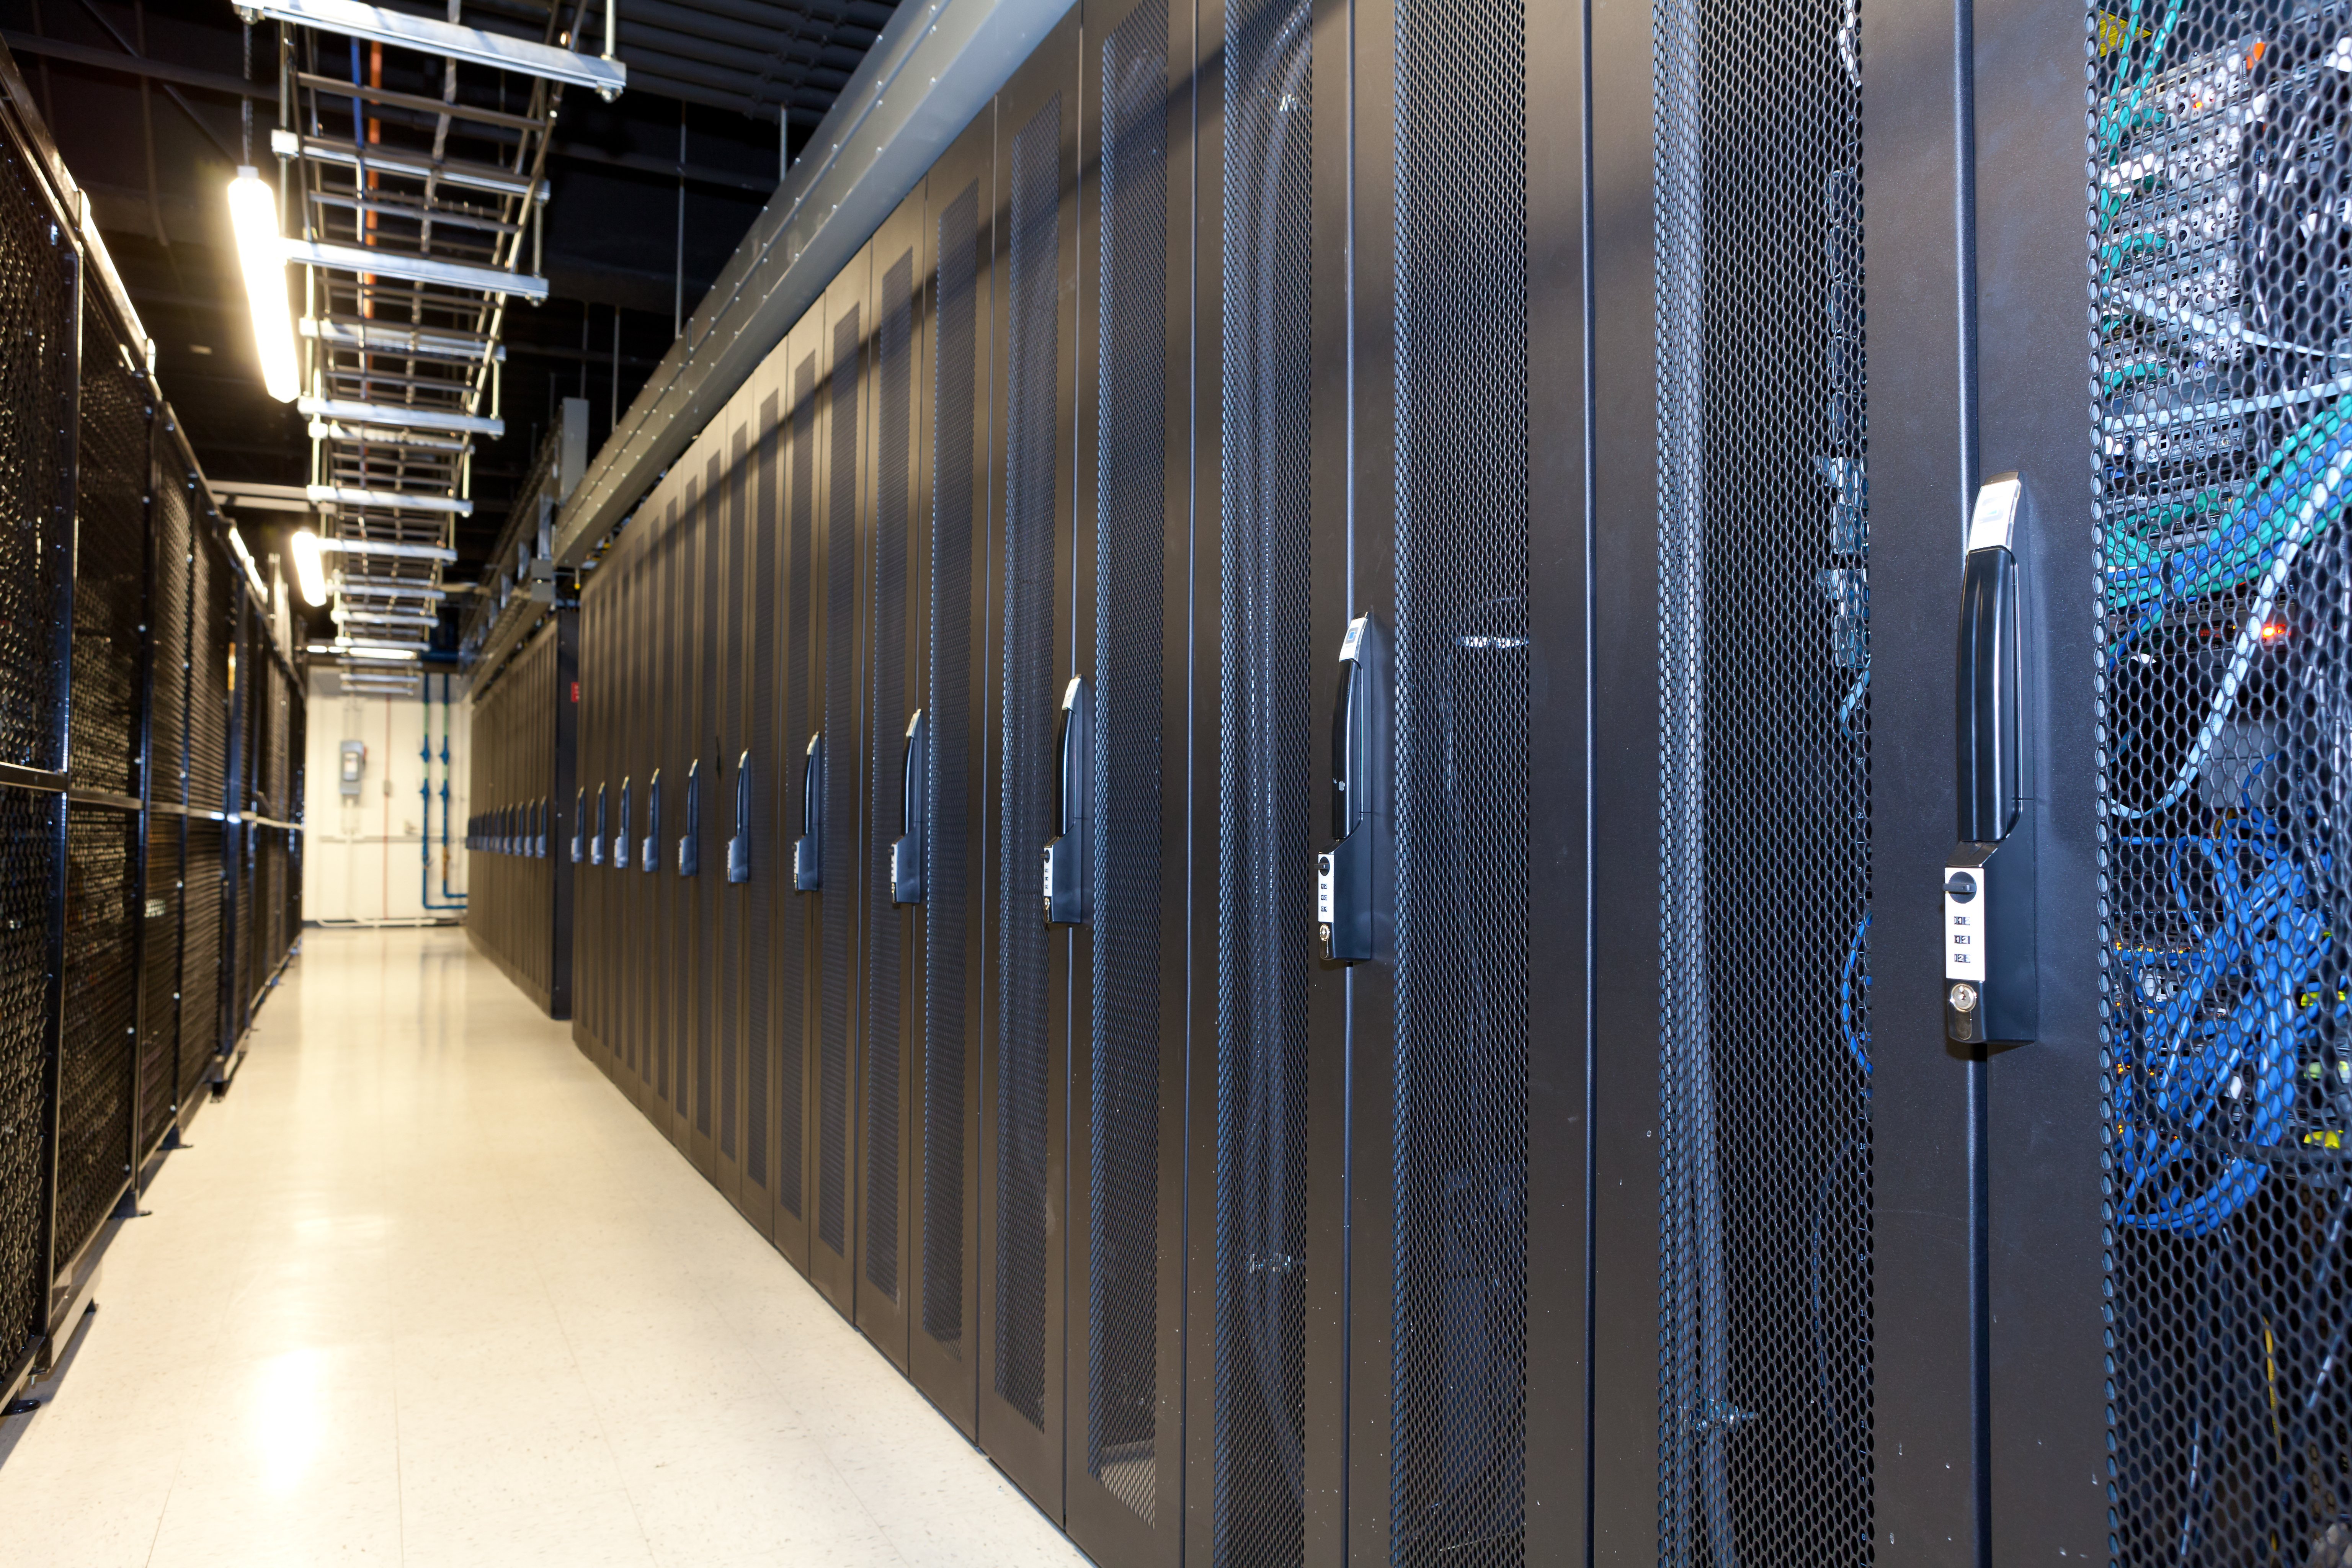 A photograph of a wall of computer servers in a data center.